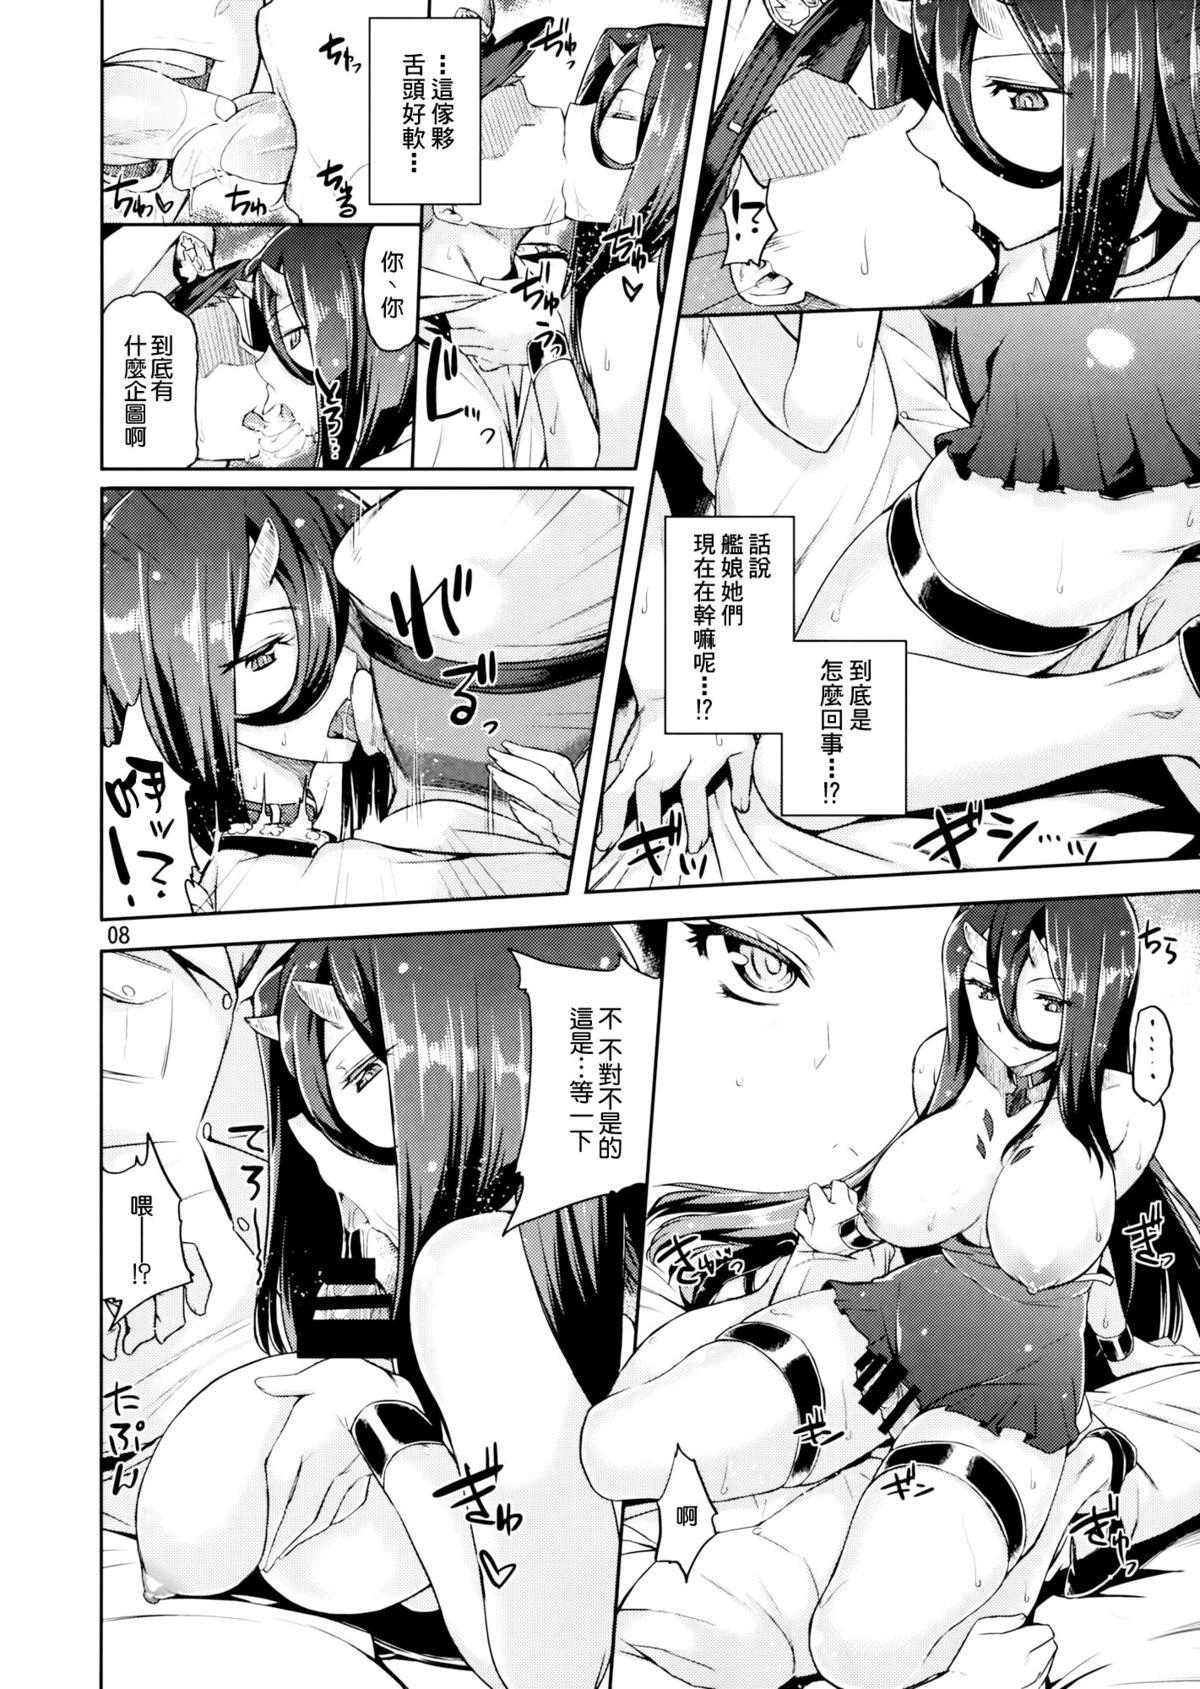 Upskirt Amicable Unseen Entity - Kantai collection Wife - Page 8